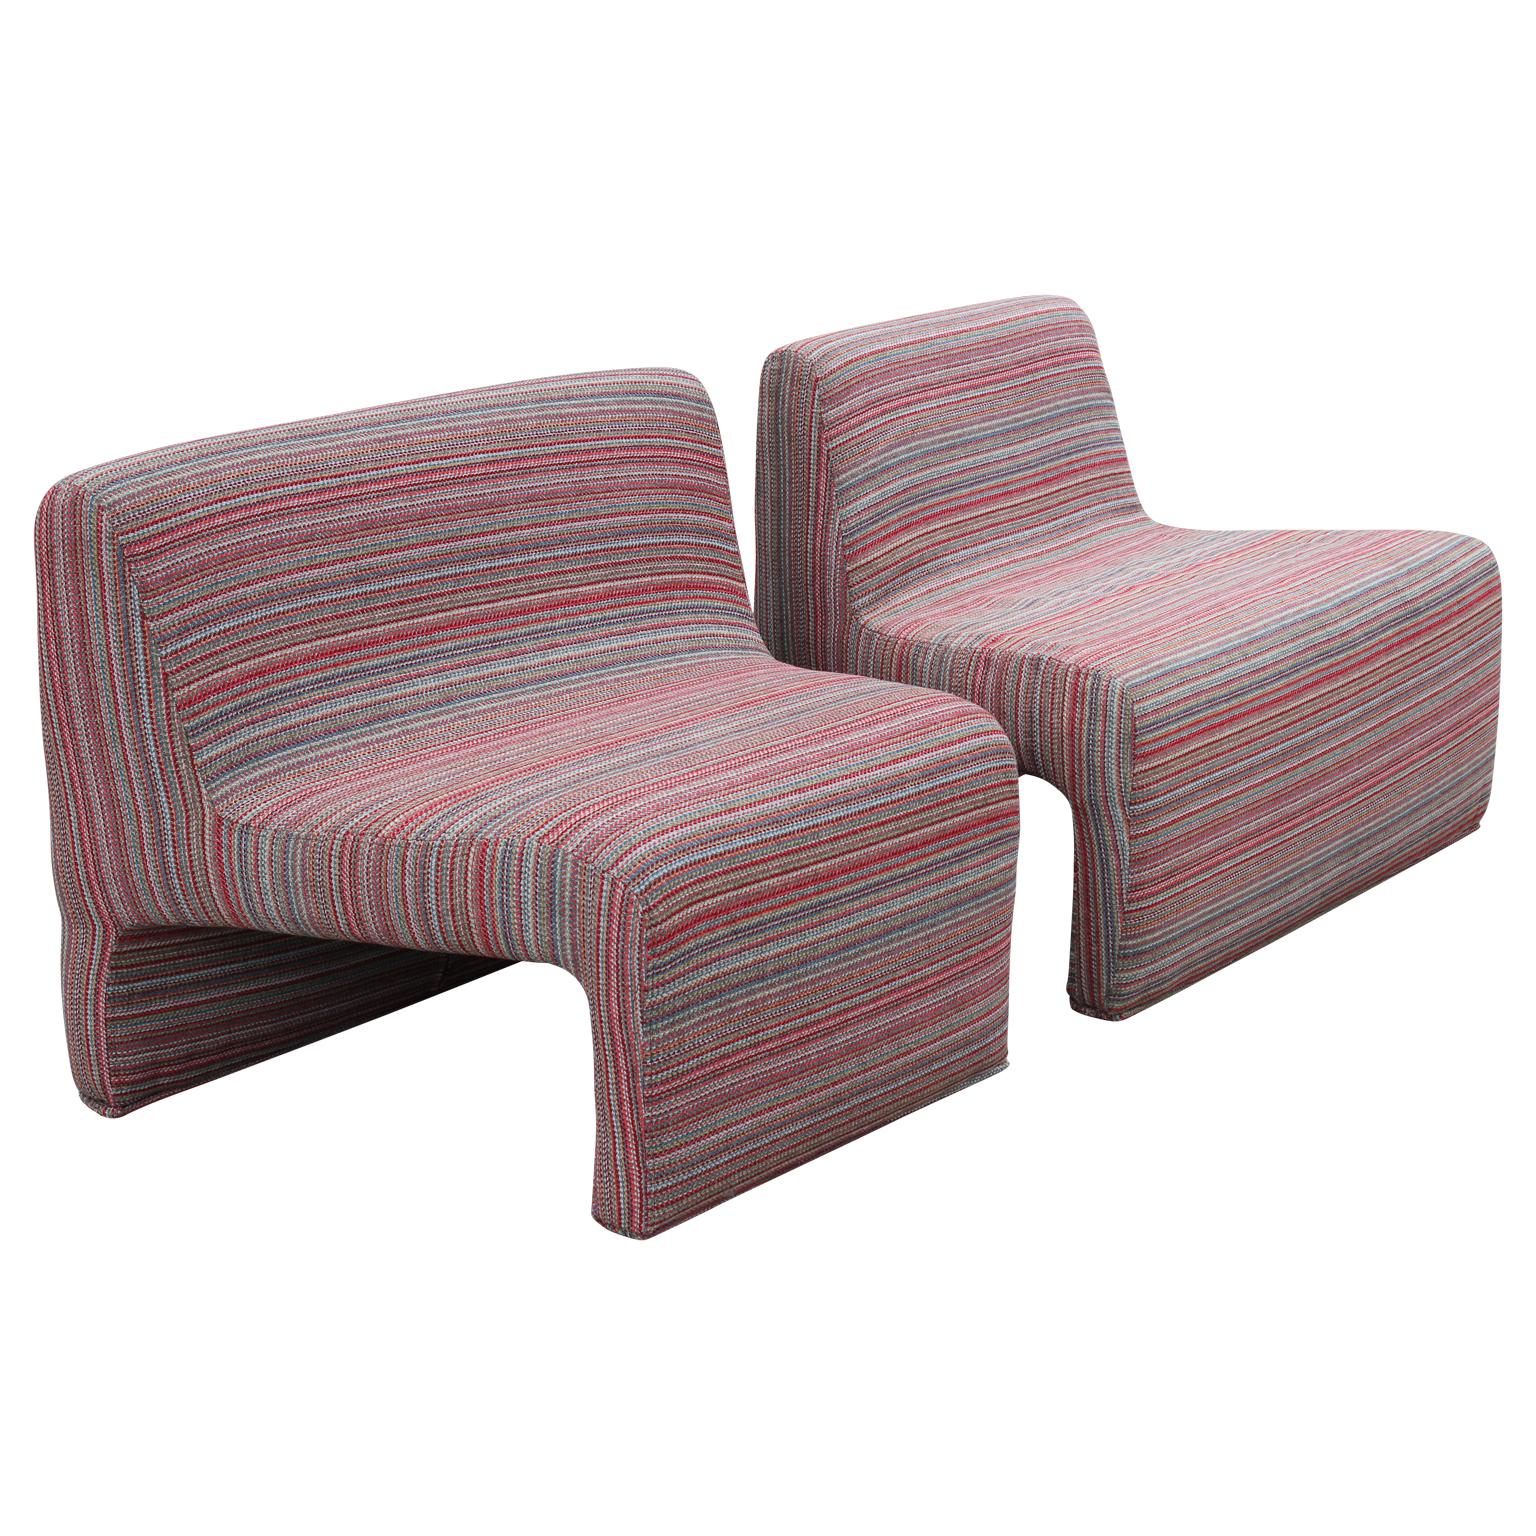 Delightful mismatched conjoining modular lounge chairs that are sculptural and modern in design. Fun, seventies feel that will add a pop of color into any room for an aesthetically pleasing look.